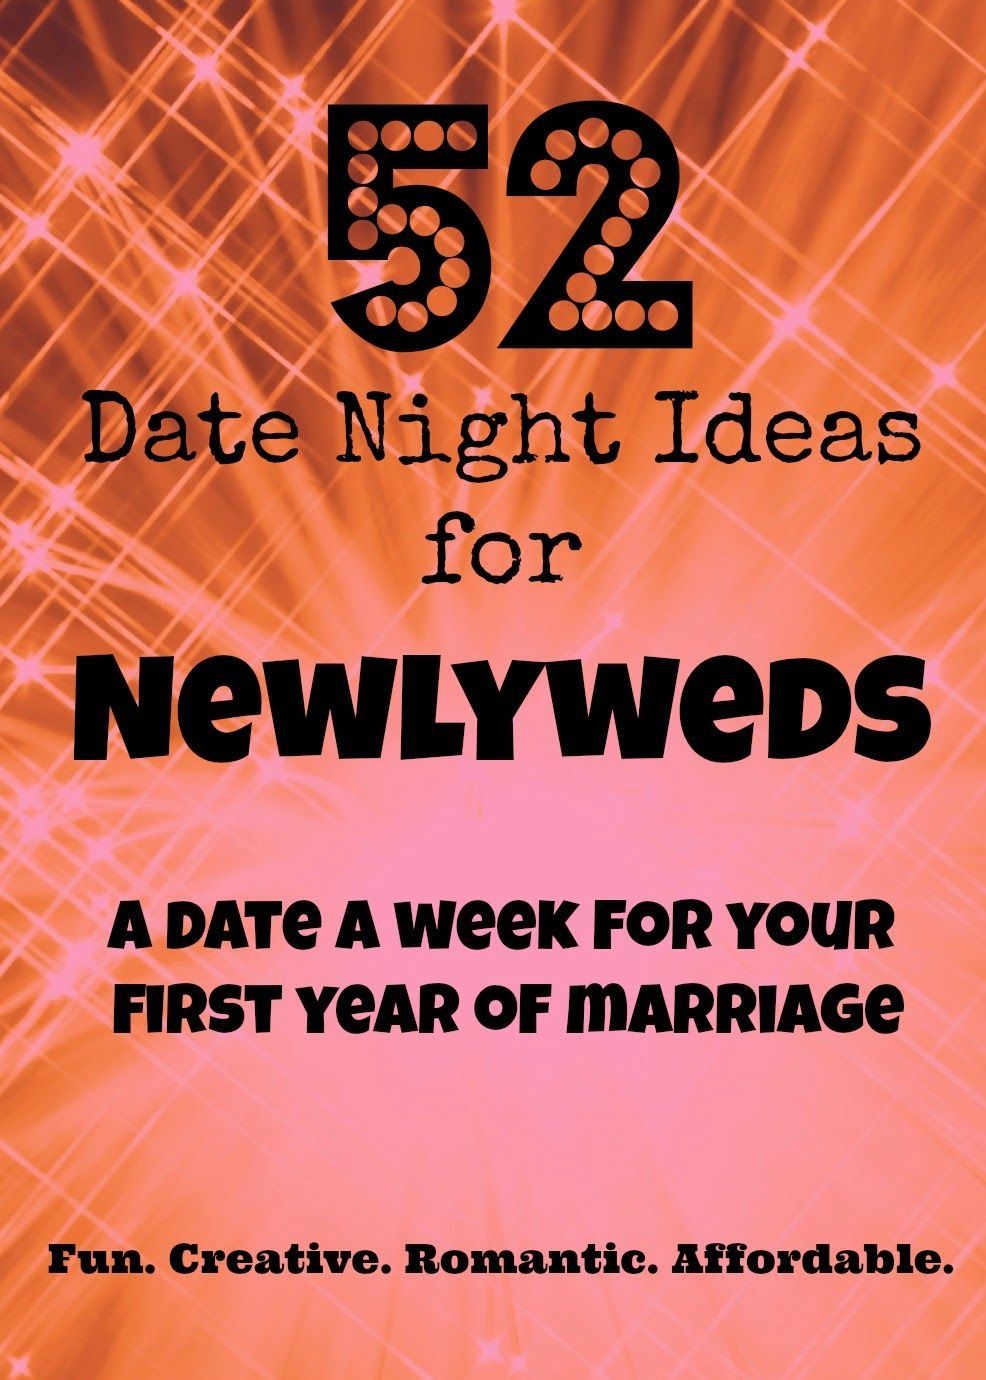 Date Night Ideas. 52 Date Night Ideas for Newlyweds. These are fun at any stage in marriage! Newlywed Date Night Ideas